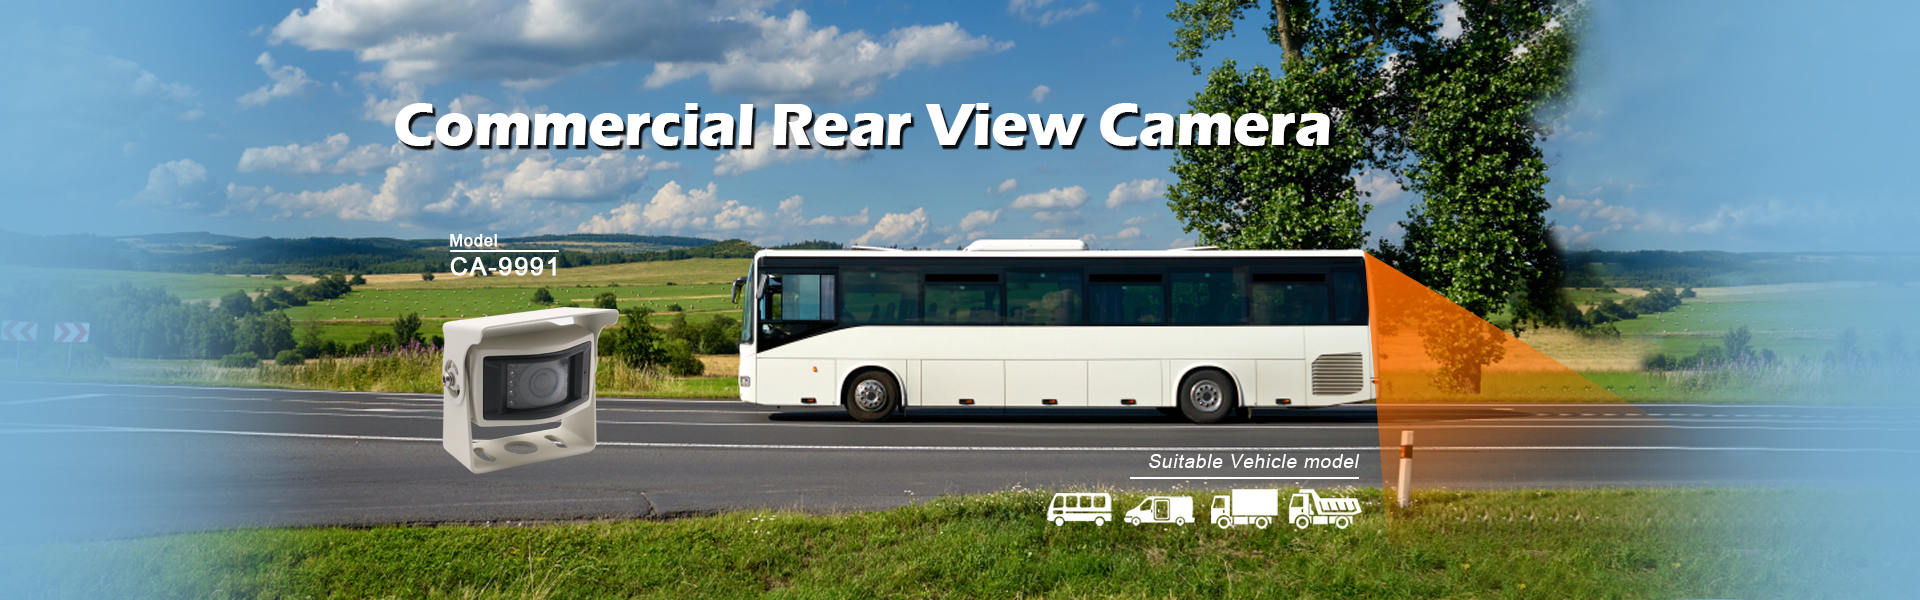 High quality rear view cameras for commercial vehicles